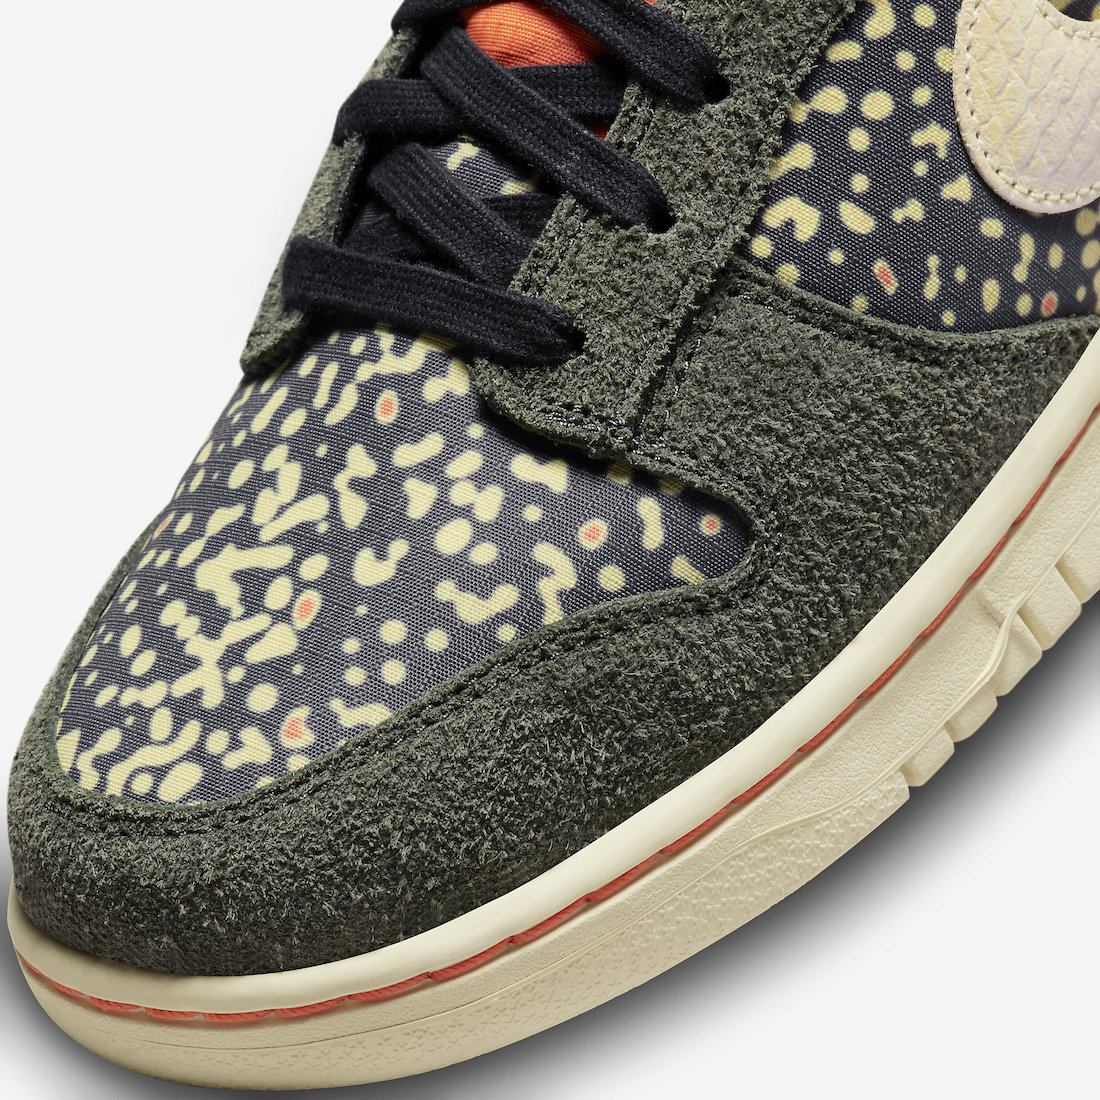 Nike Dunk Low Rainbow Trout FN7523 300 Release Date 6